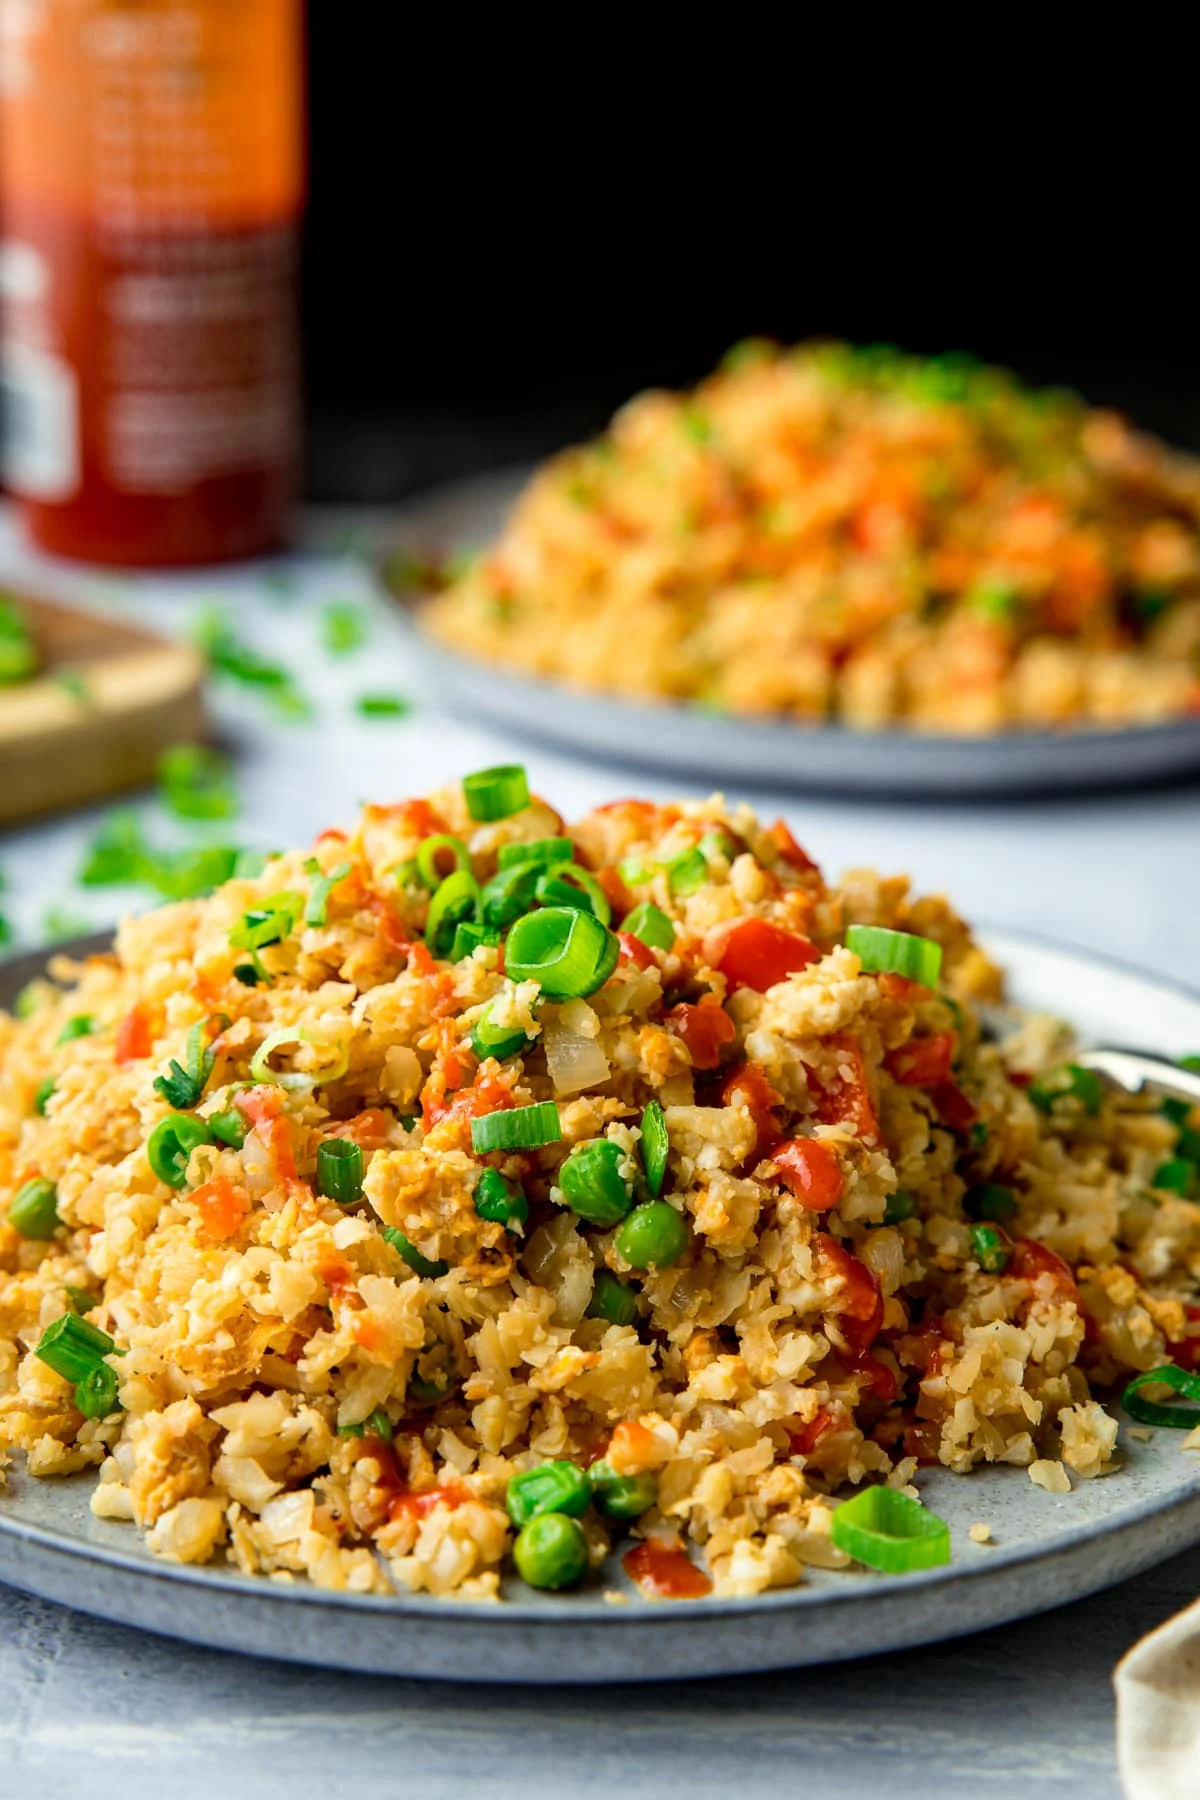 Cauliflower fried rice piled up on a plate with a further plate and chilli sauce bottle in the background